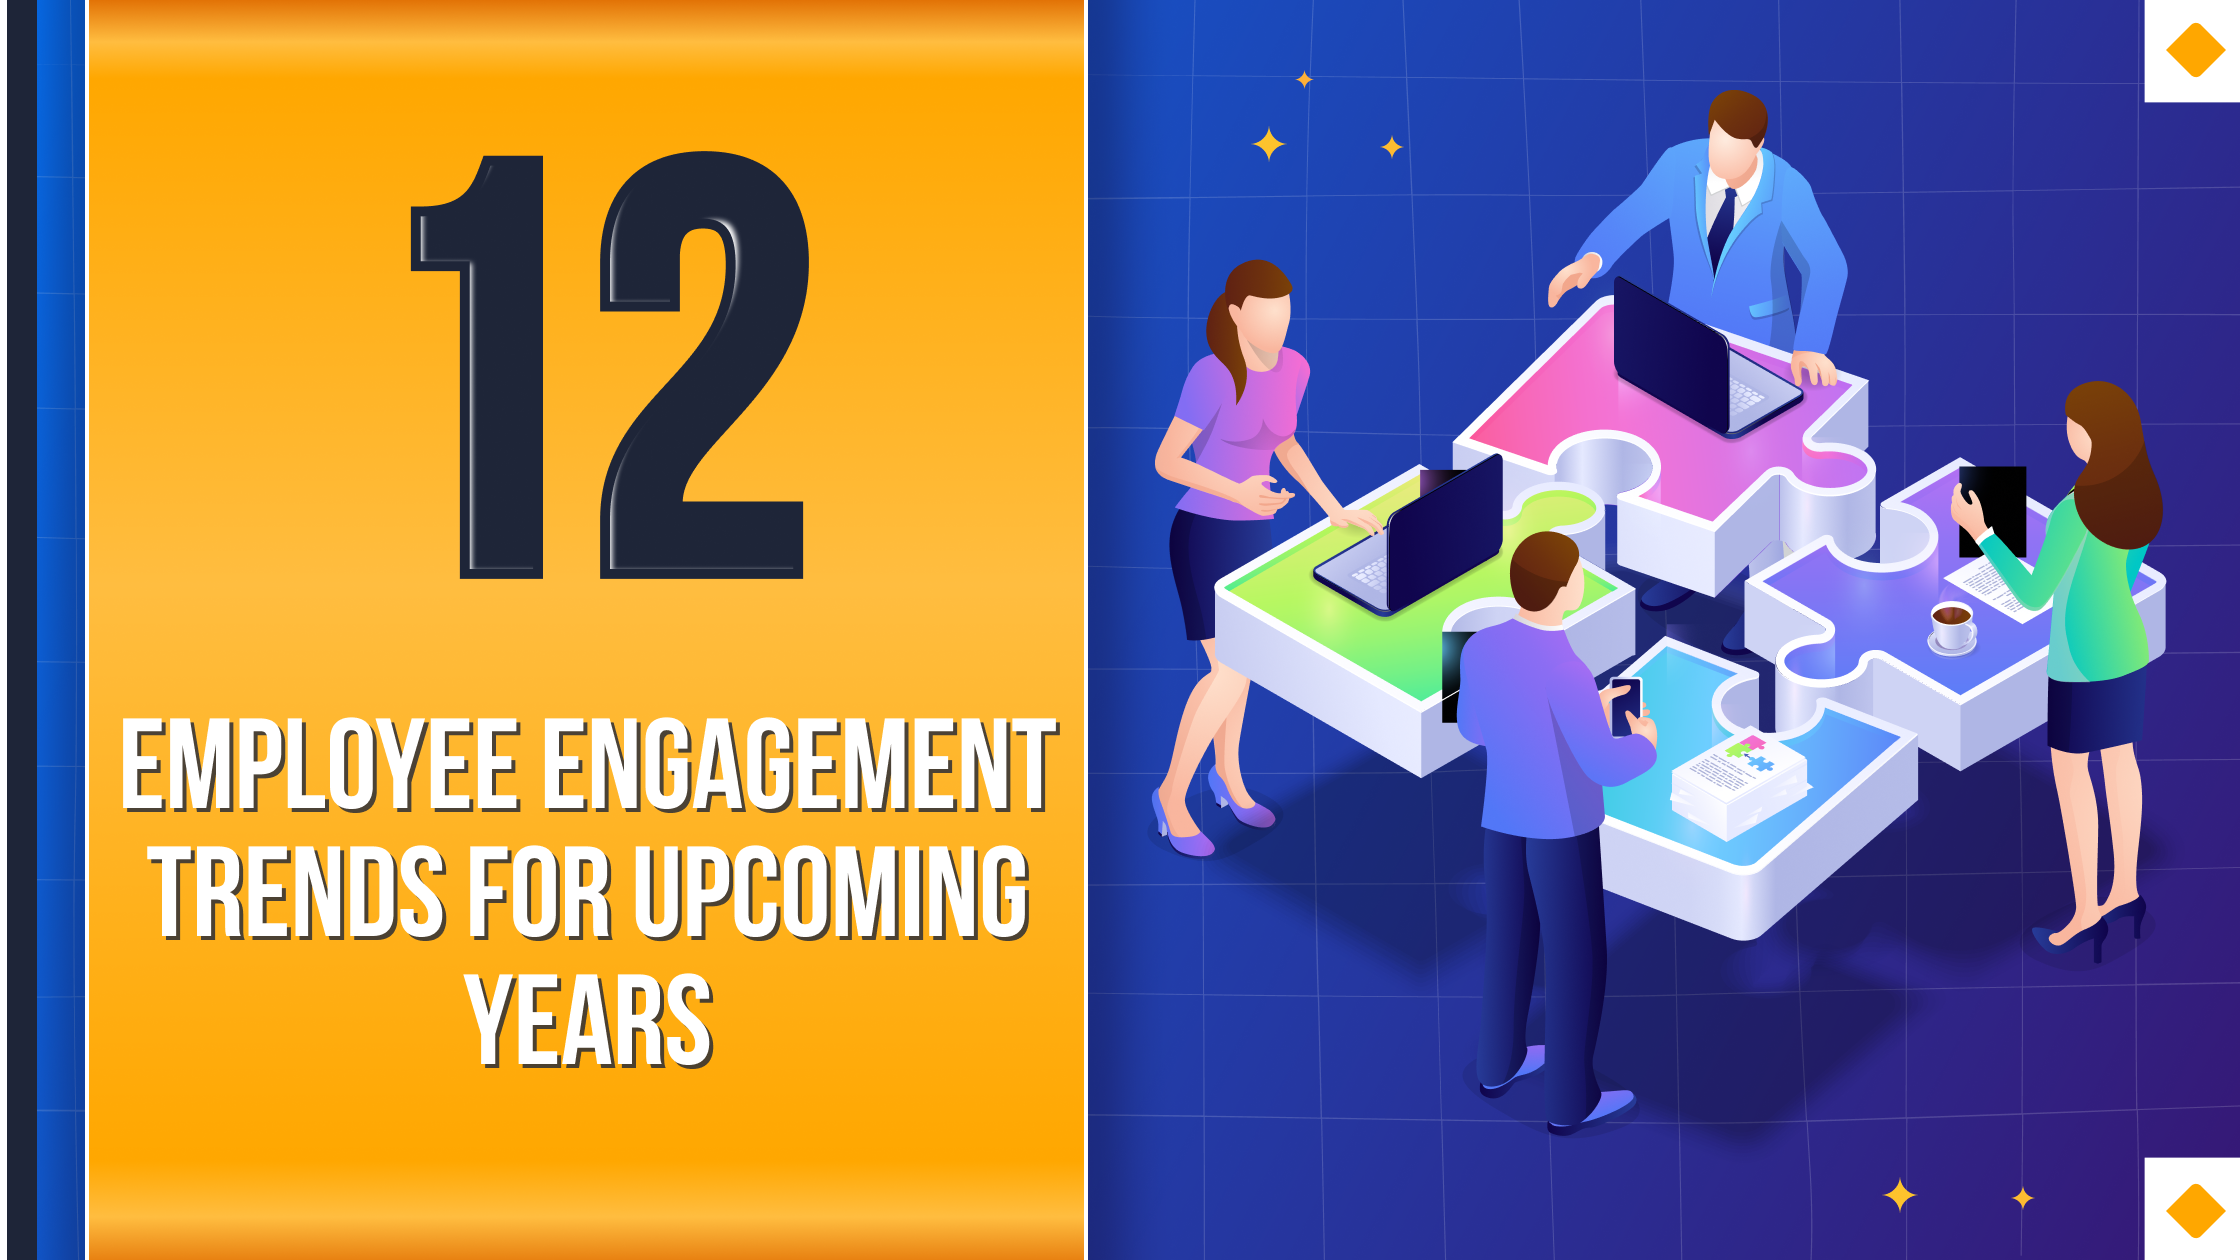 12 Employee Engagement Trends for Upcoming Years